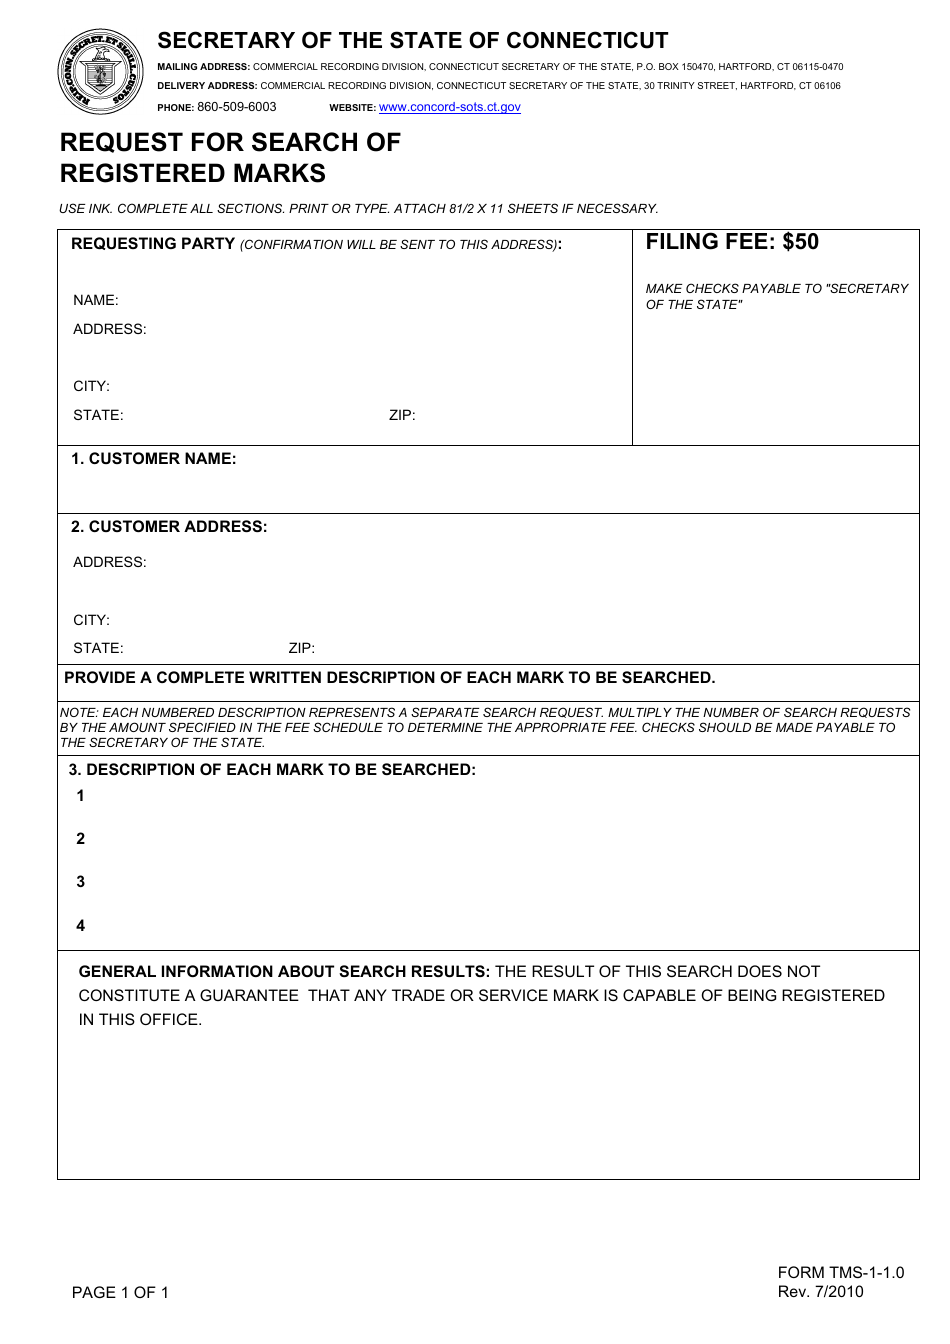 Form TMS-1.1.0 Request for Search of Registered Marks - Connecticut, Page 1